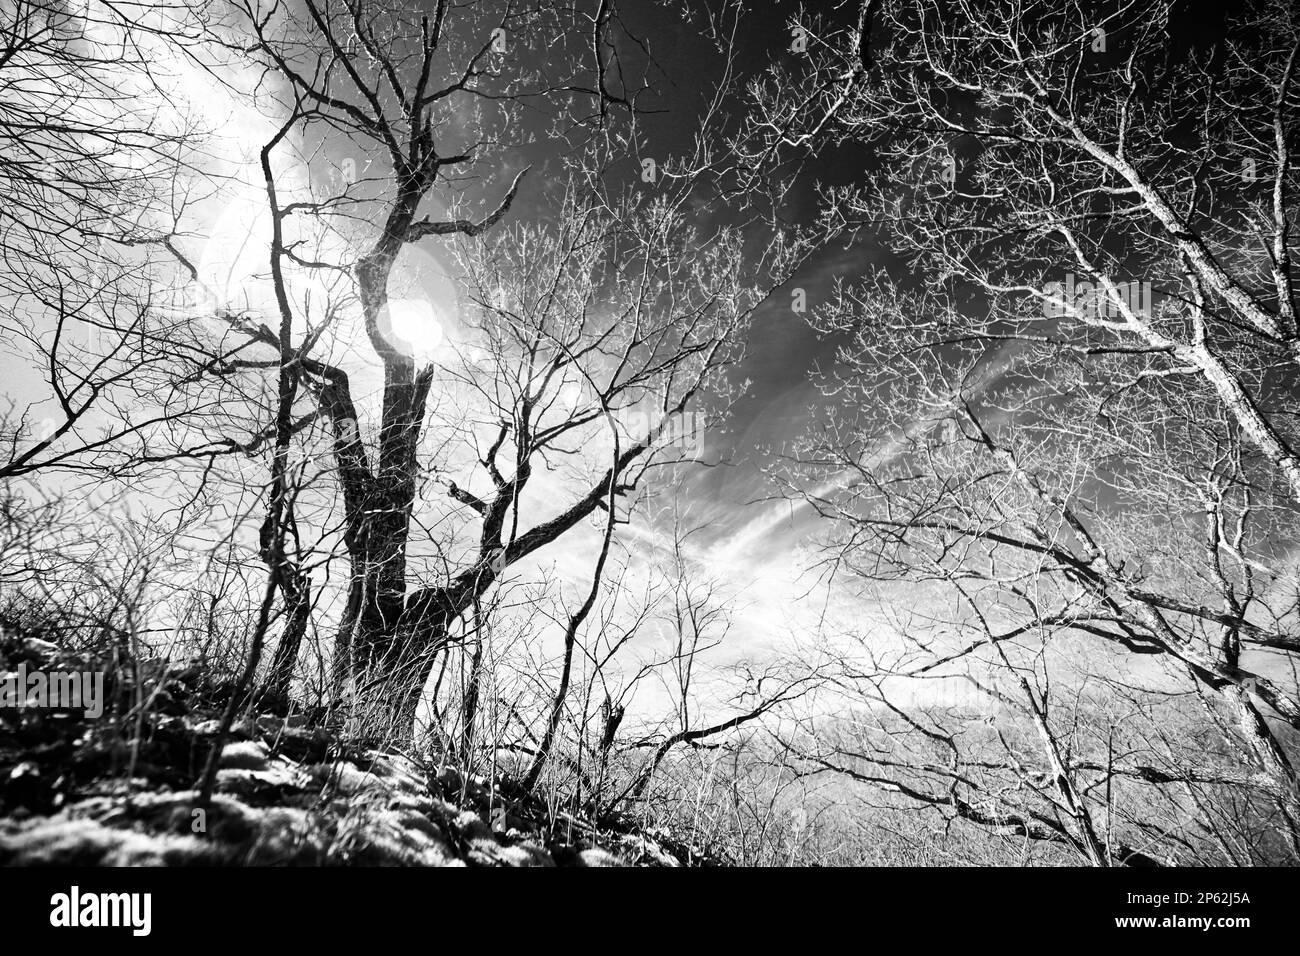 A black and white infrared image of some dormant trees against a contrasting sky on a late winter morning. Image evokes chaos and branching thoughts. Stock Photo